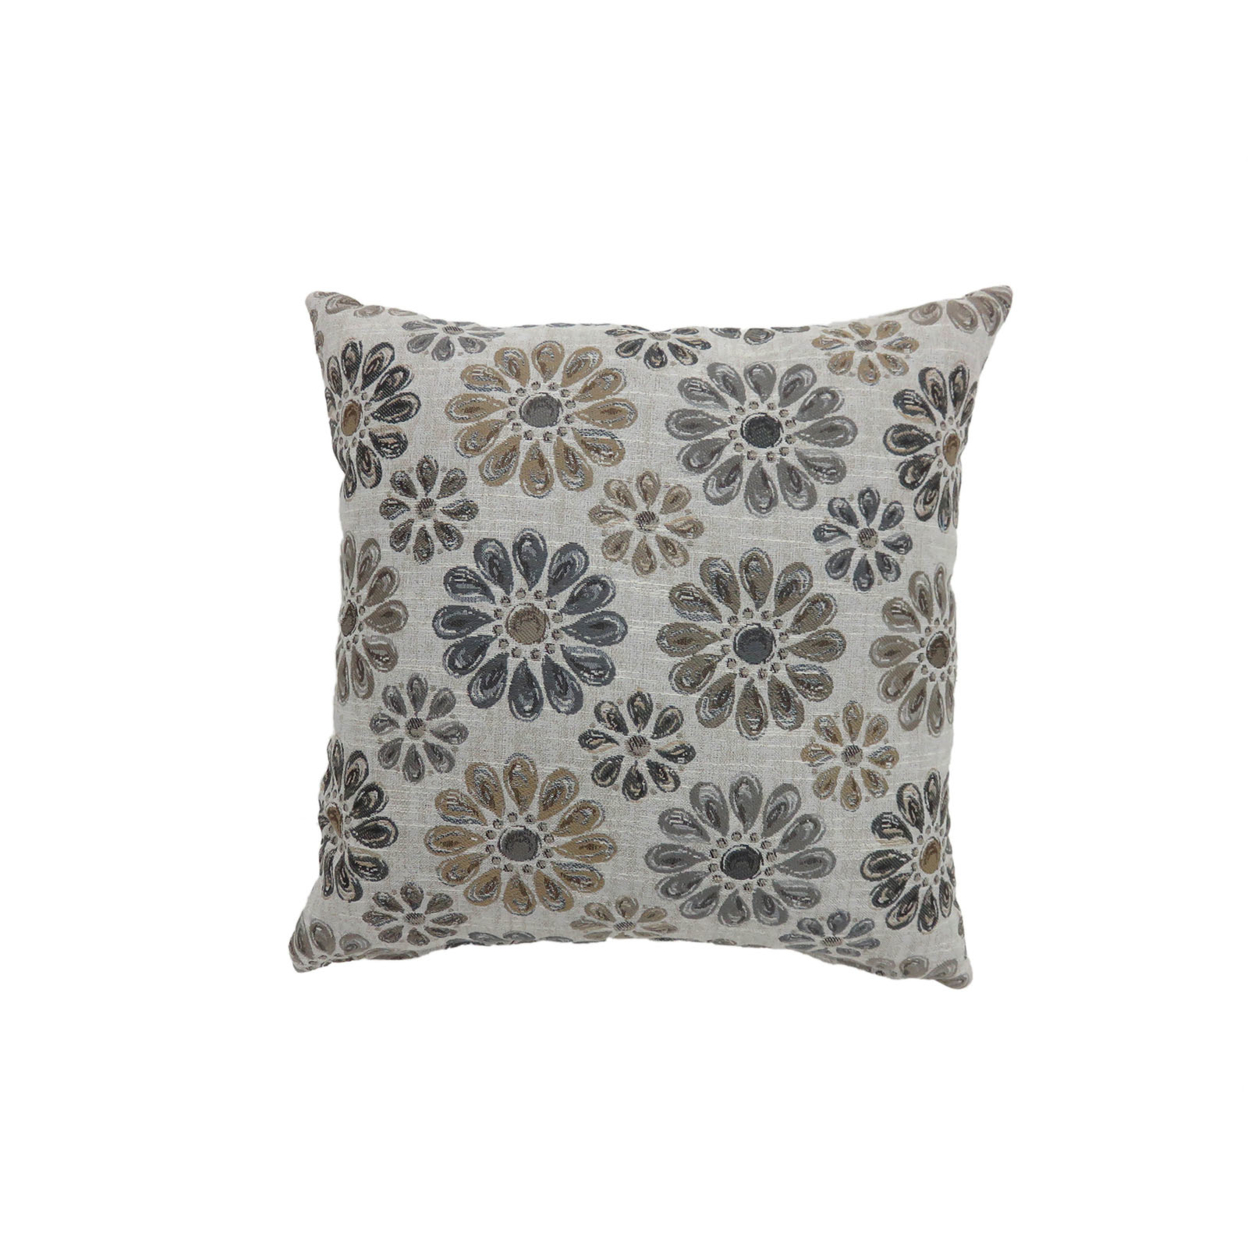 22 Inch Throw Pillow, Set Of 2, Polyester Floral Design Fabric, Gray